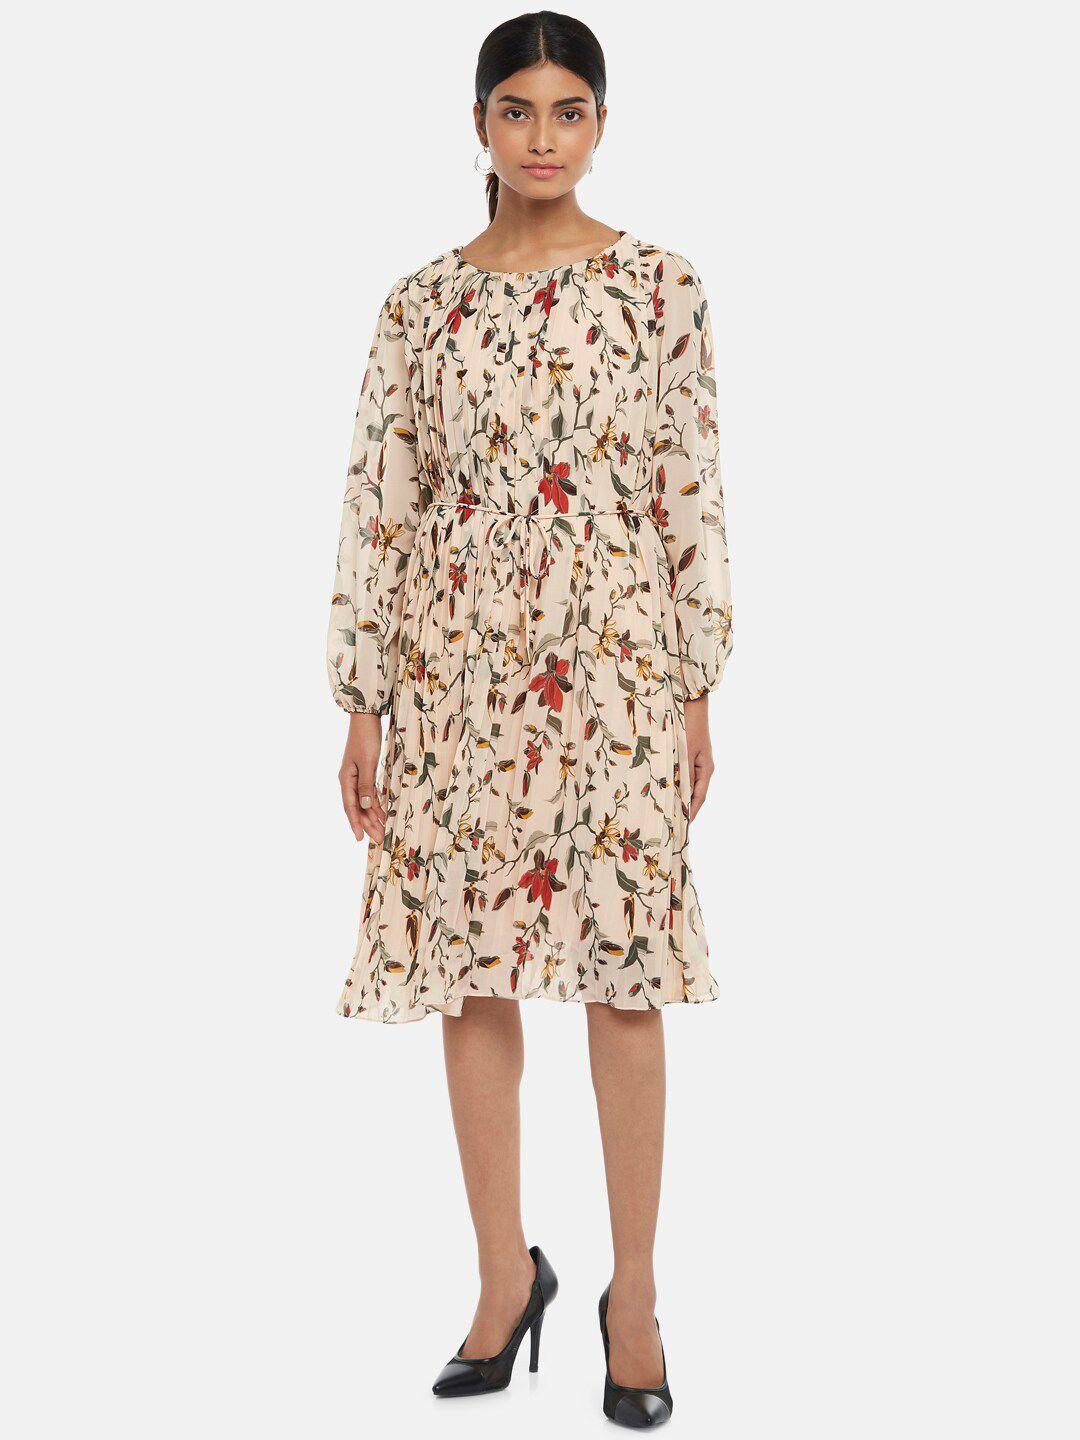 annabelle-by-pantaloons-off-white-floral-a-line-dress